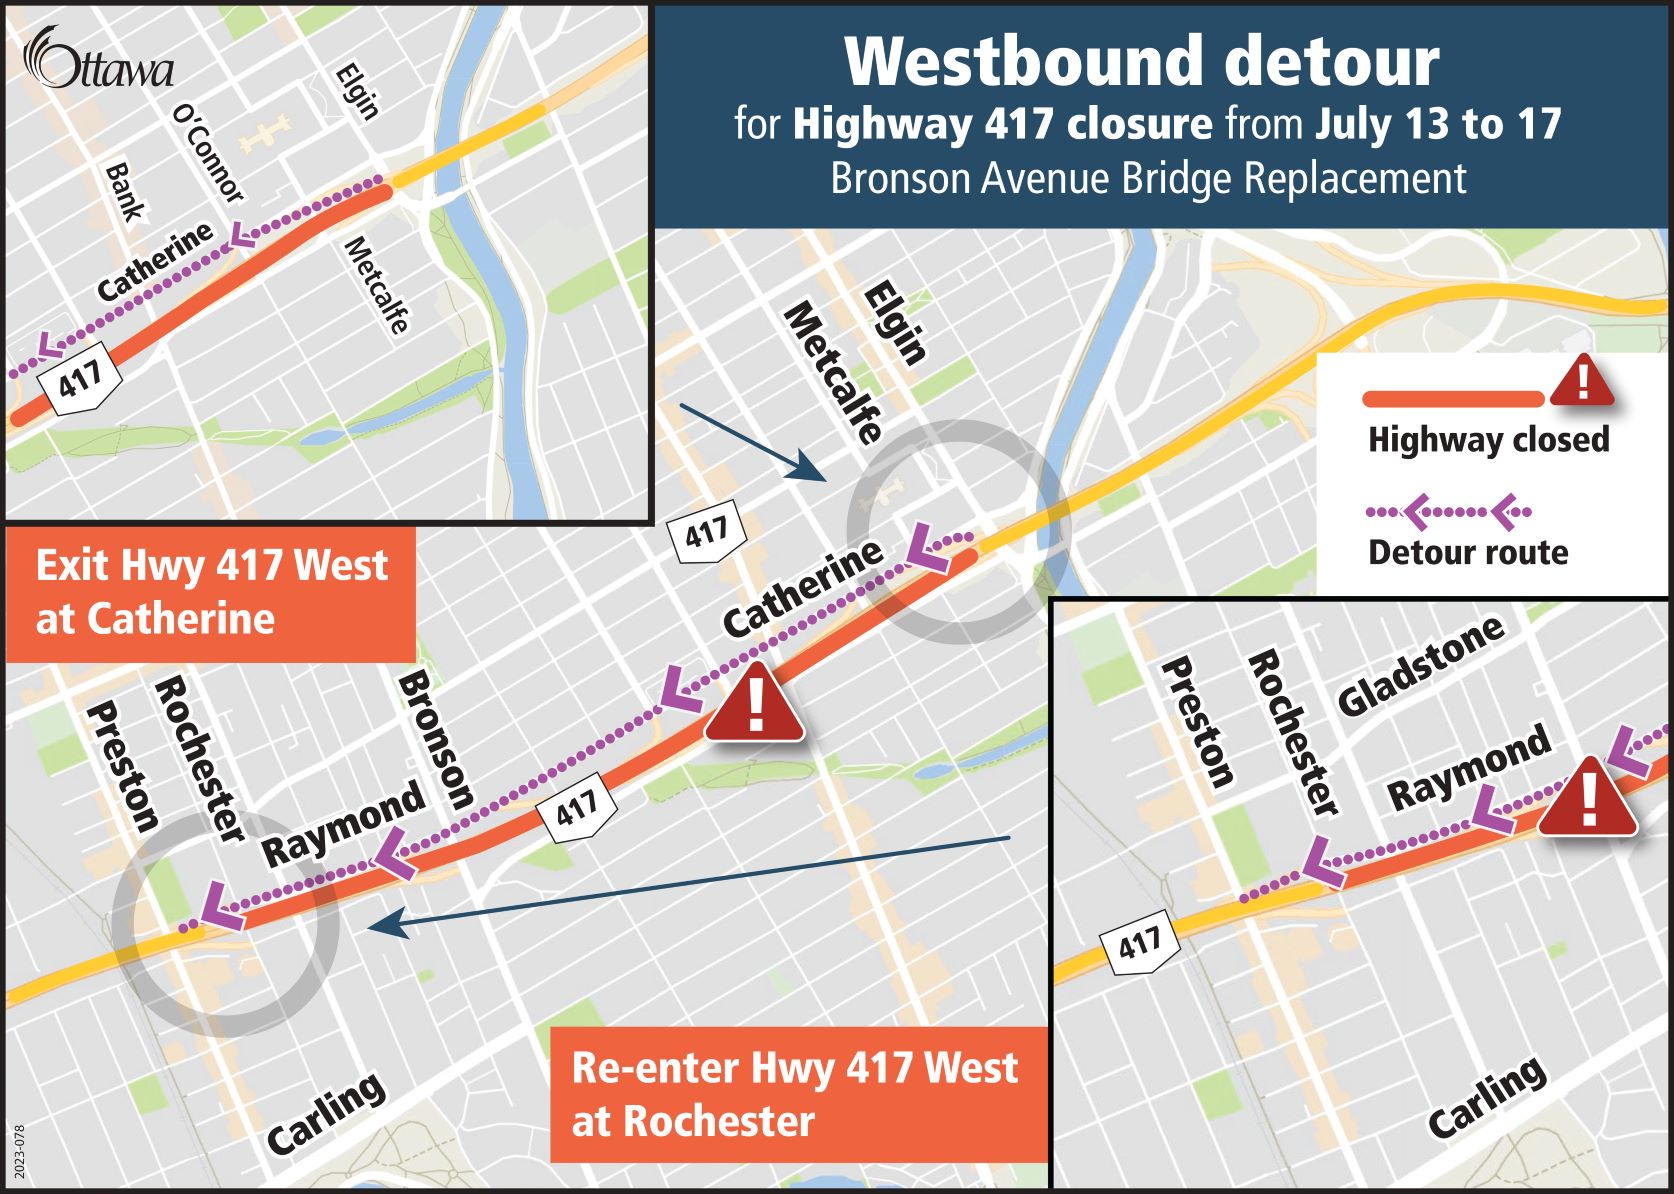 A map providing visual of the Westbound detour for Highway 417 closure from July 13 to 17 for the Bronson Avenue Bridge Replacement. Visit the link in the post for full details.